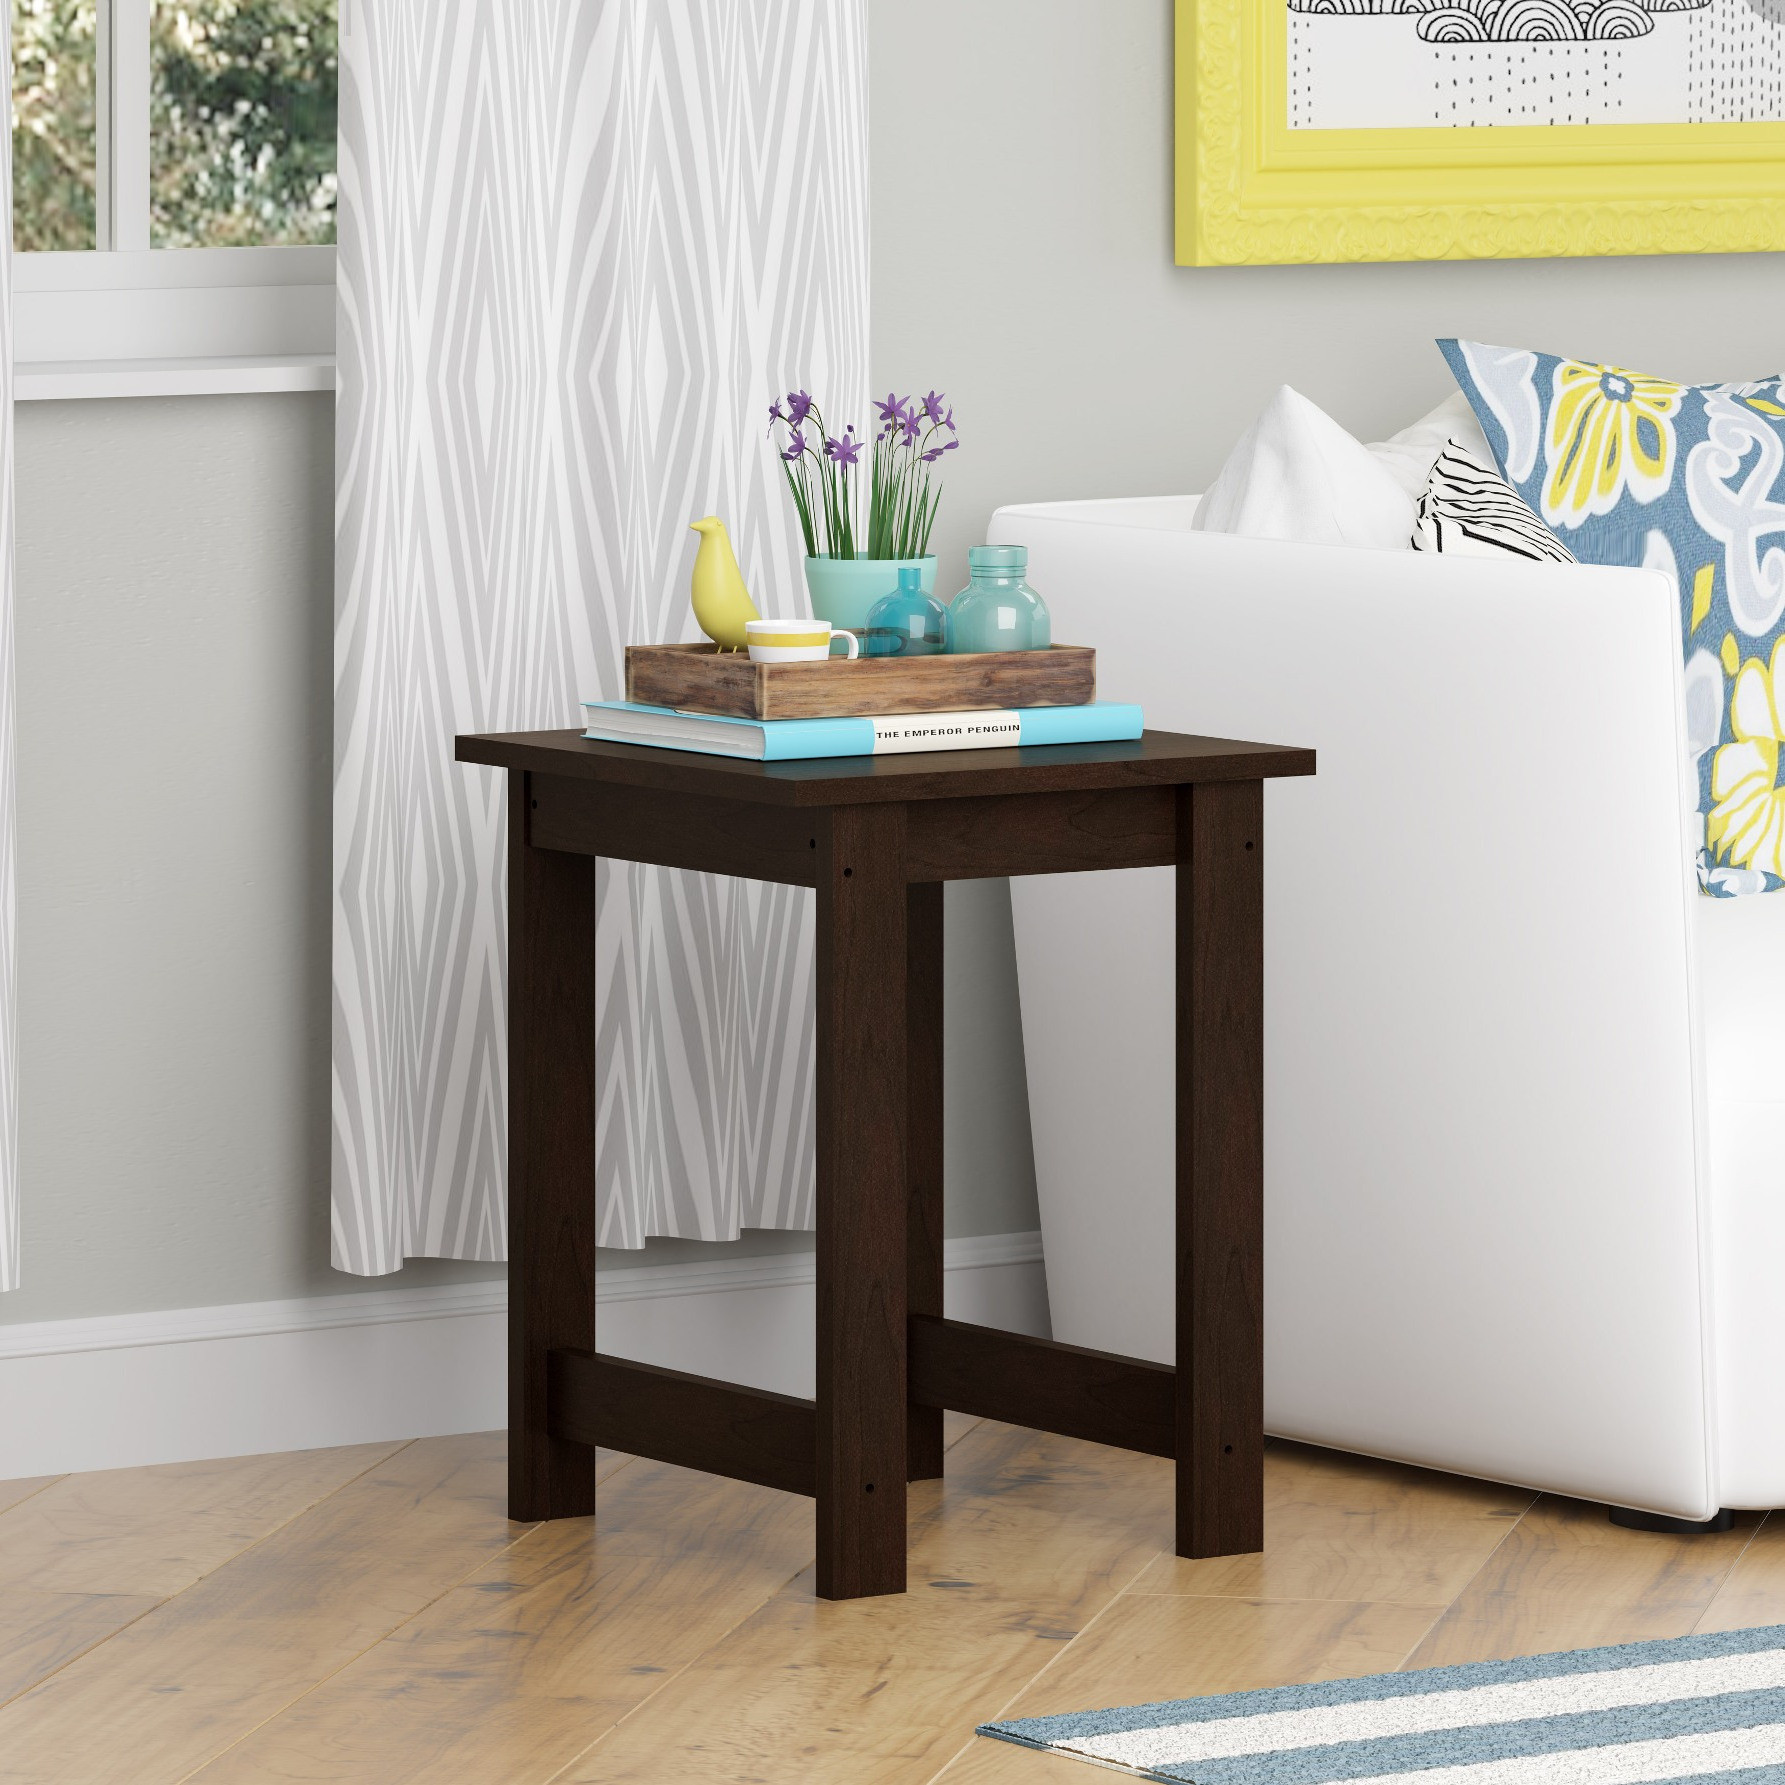 Small Livingroom Table
 End Tables for Living Room Living Room Ideas on a Bud